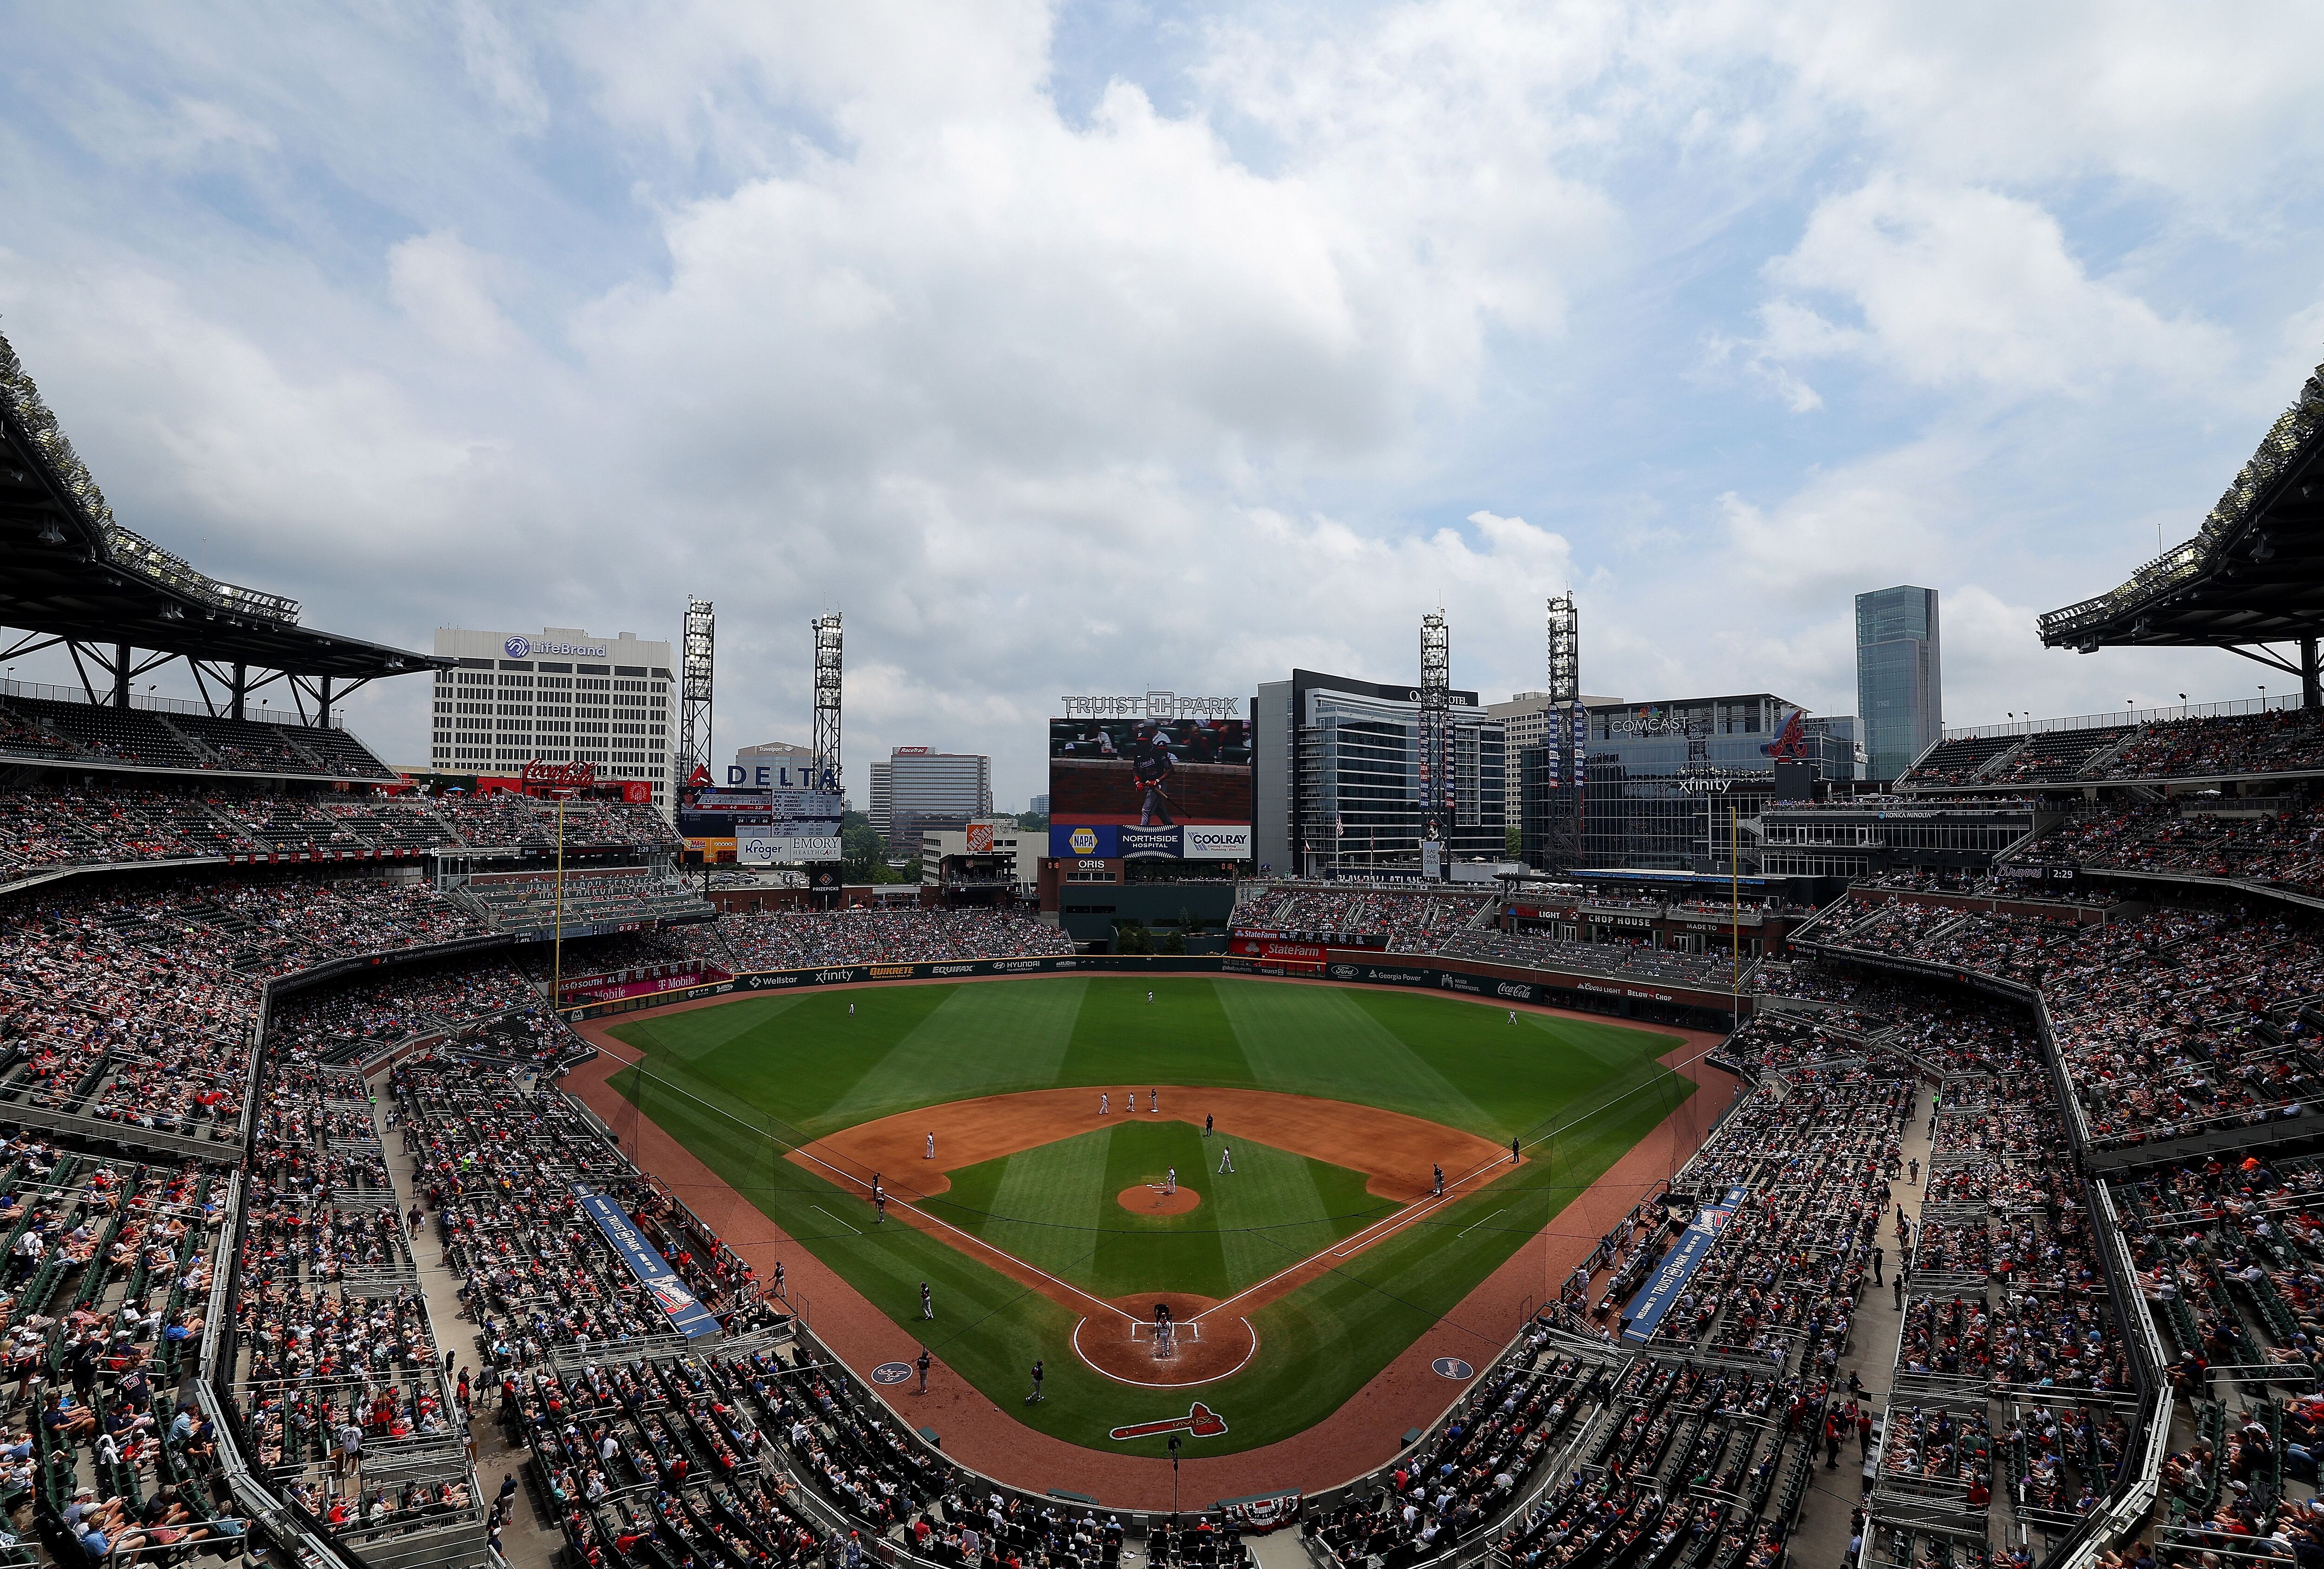 Here's an inside look at the Braves' SunTrust Park days before